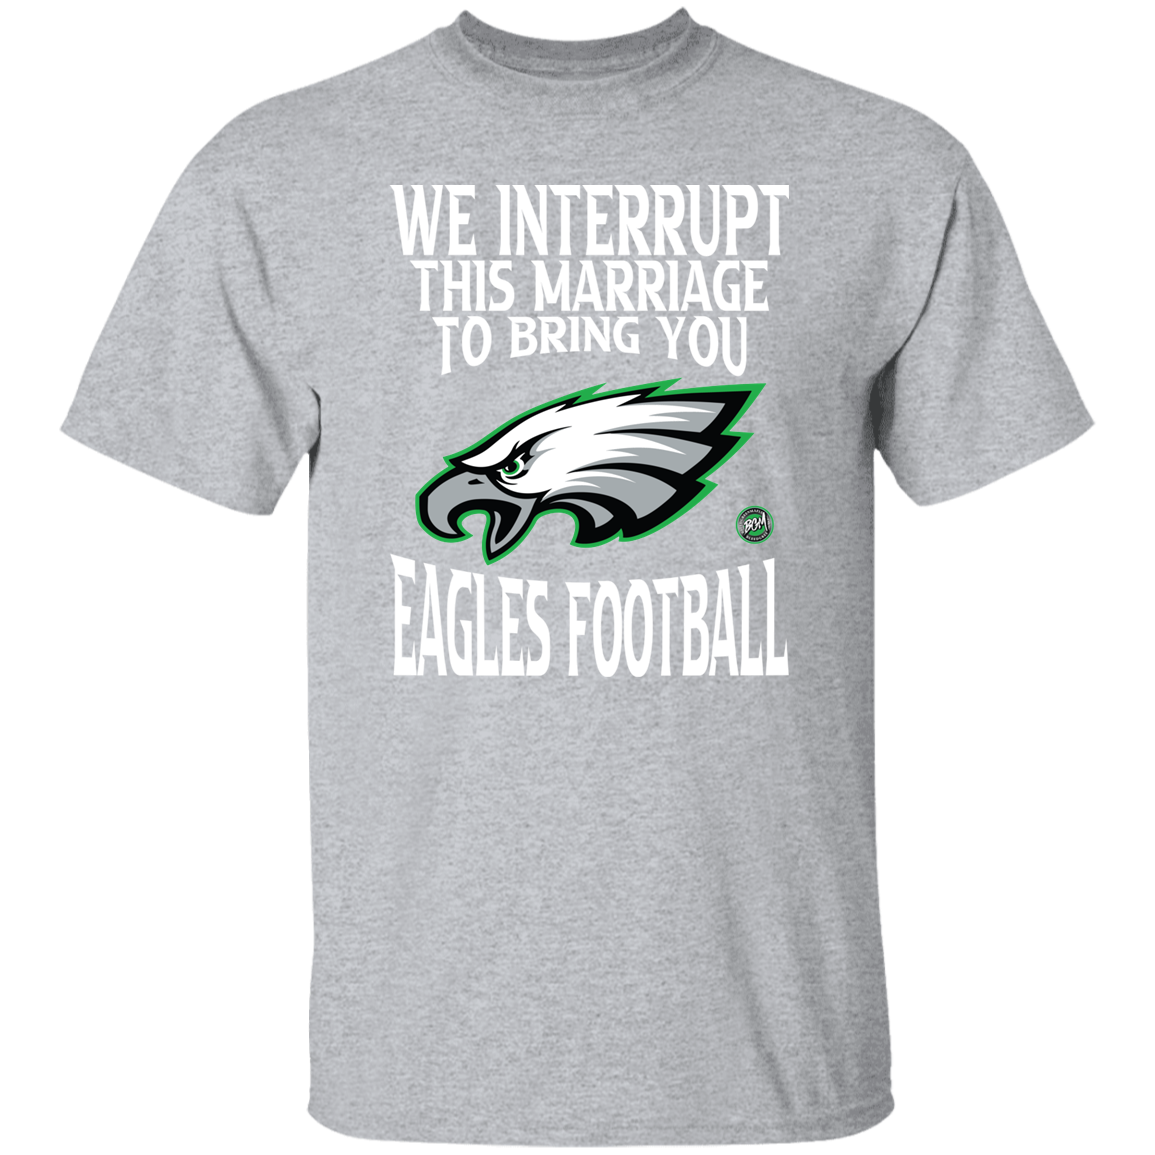 We Interrupt This Marriage To Bring You Eagles Football Unisex T-Shirt | www.BleedGreenMafia.com